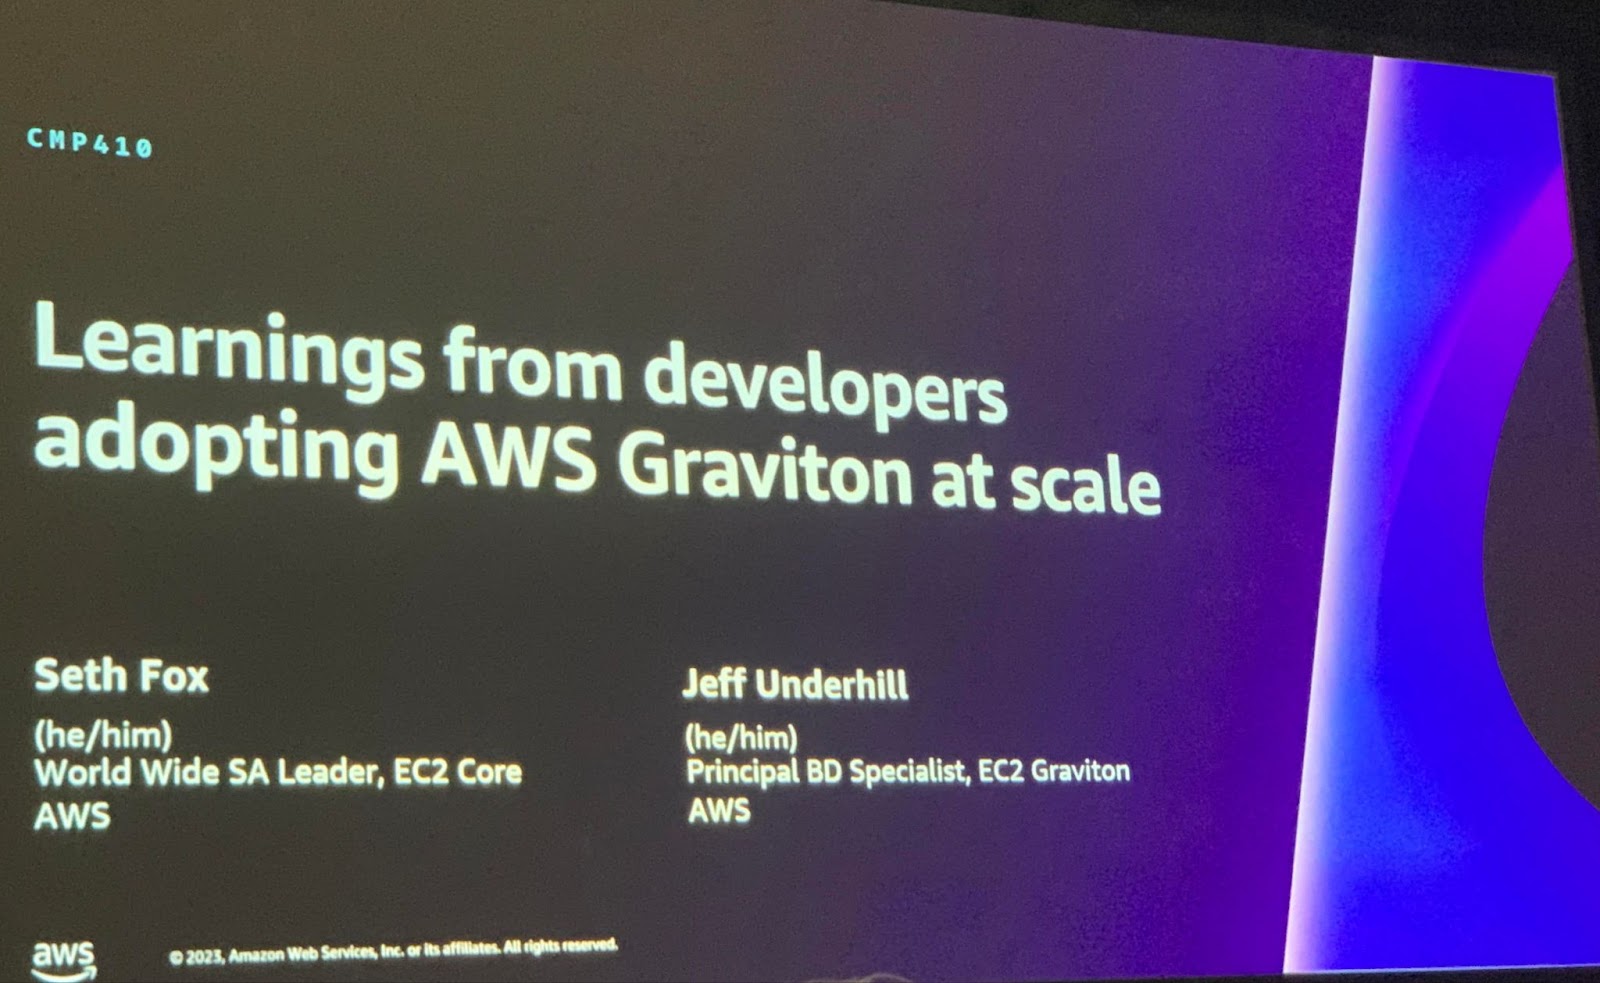 Learnings from developers adopting AWS Graviton at scale